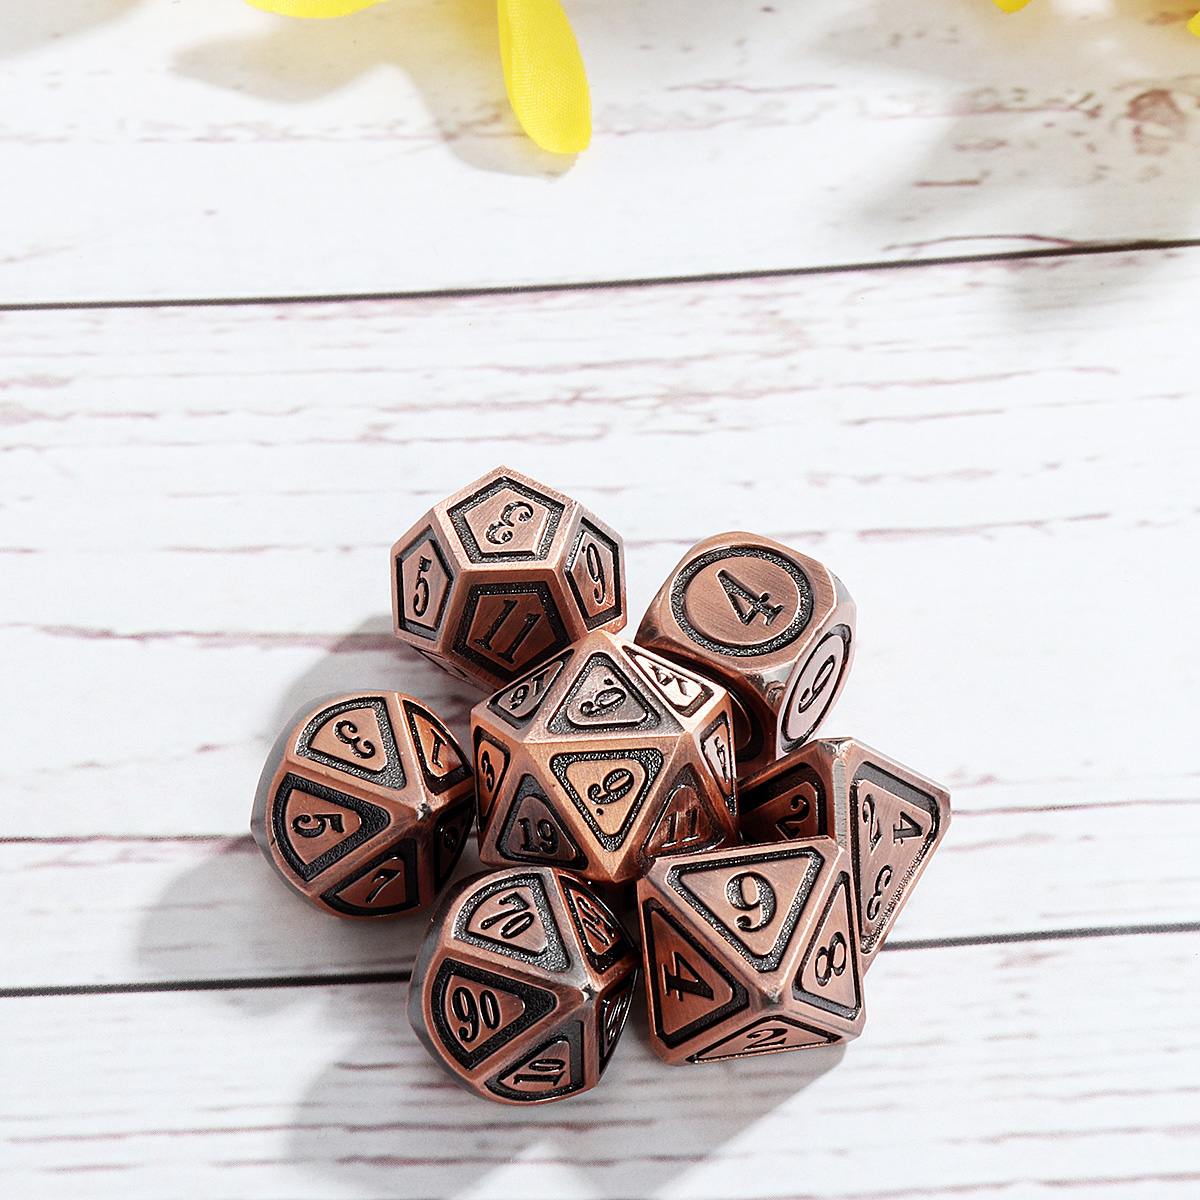 7Pcs DND Polyhedral Dice For Role Playing Game Metal Dice Set 